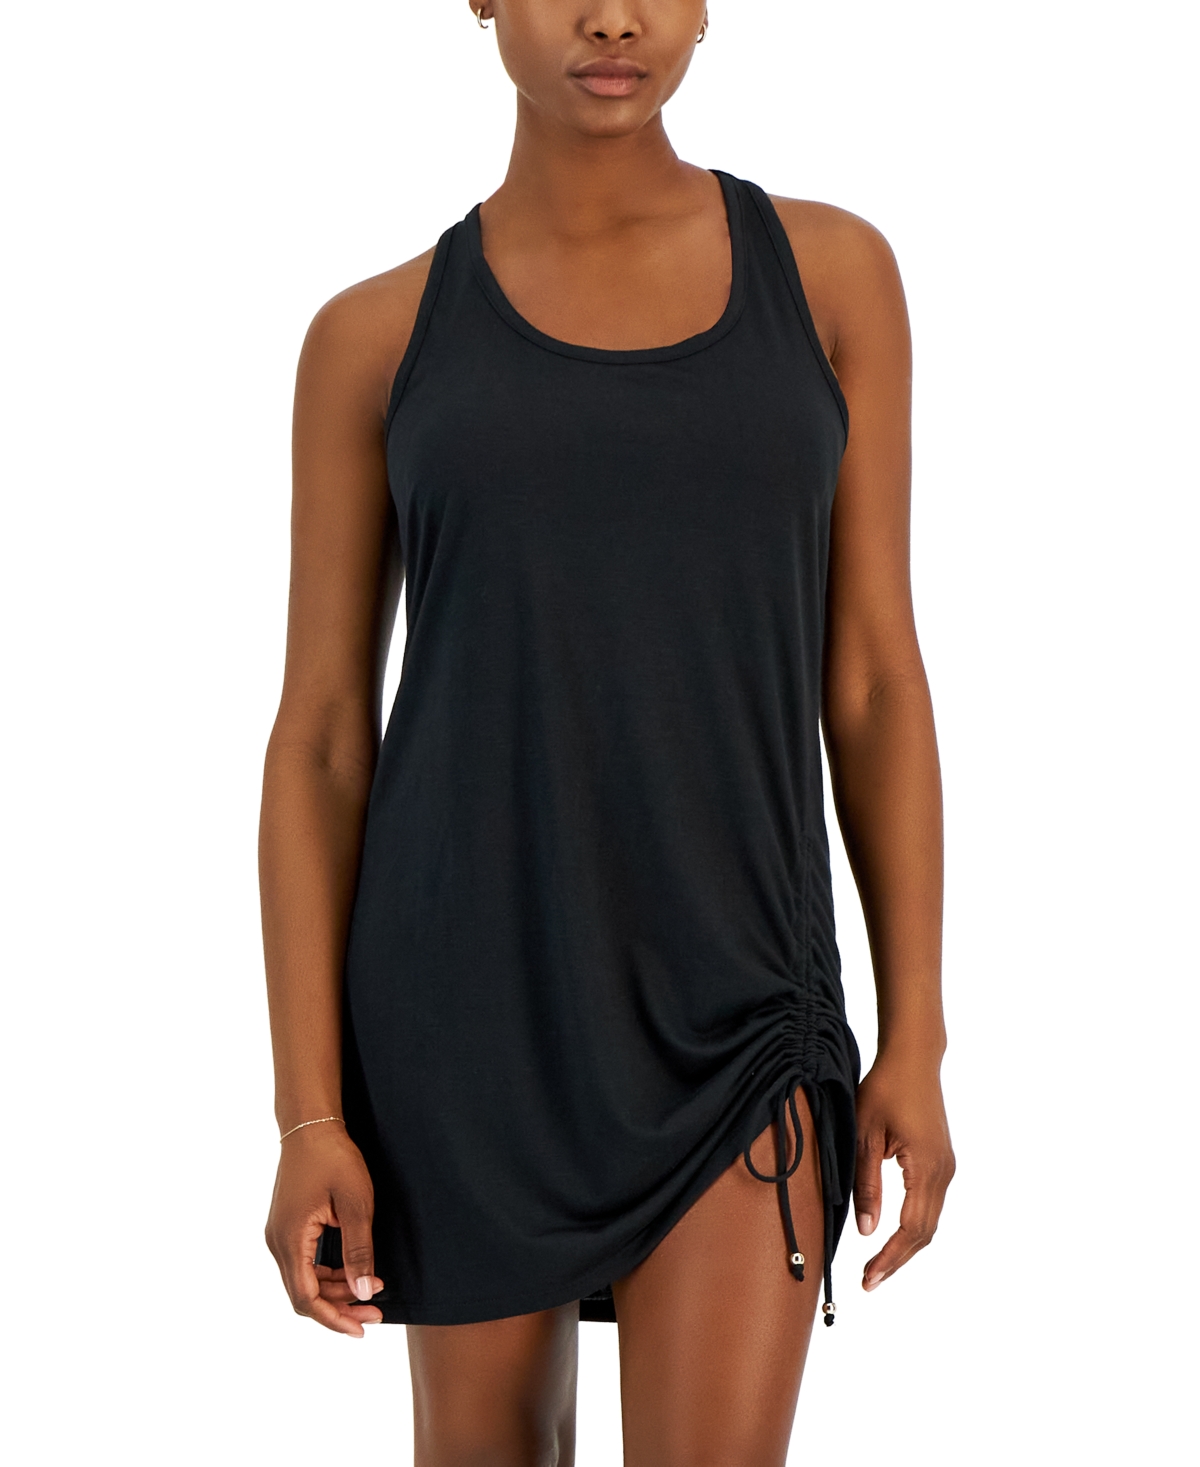 Women's Ruched Racerback Cover-Up, Created for Macy's - Black